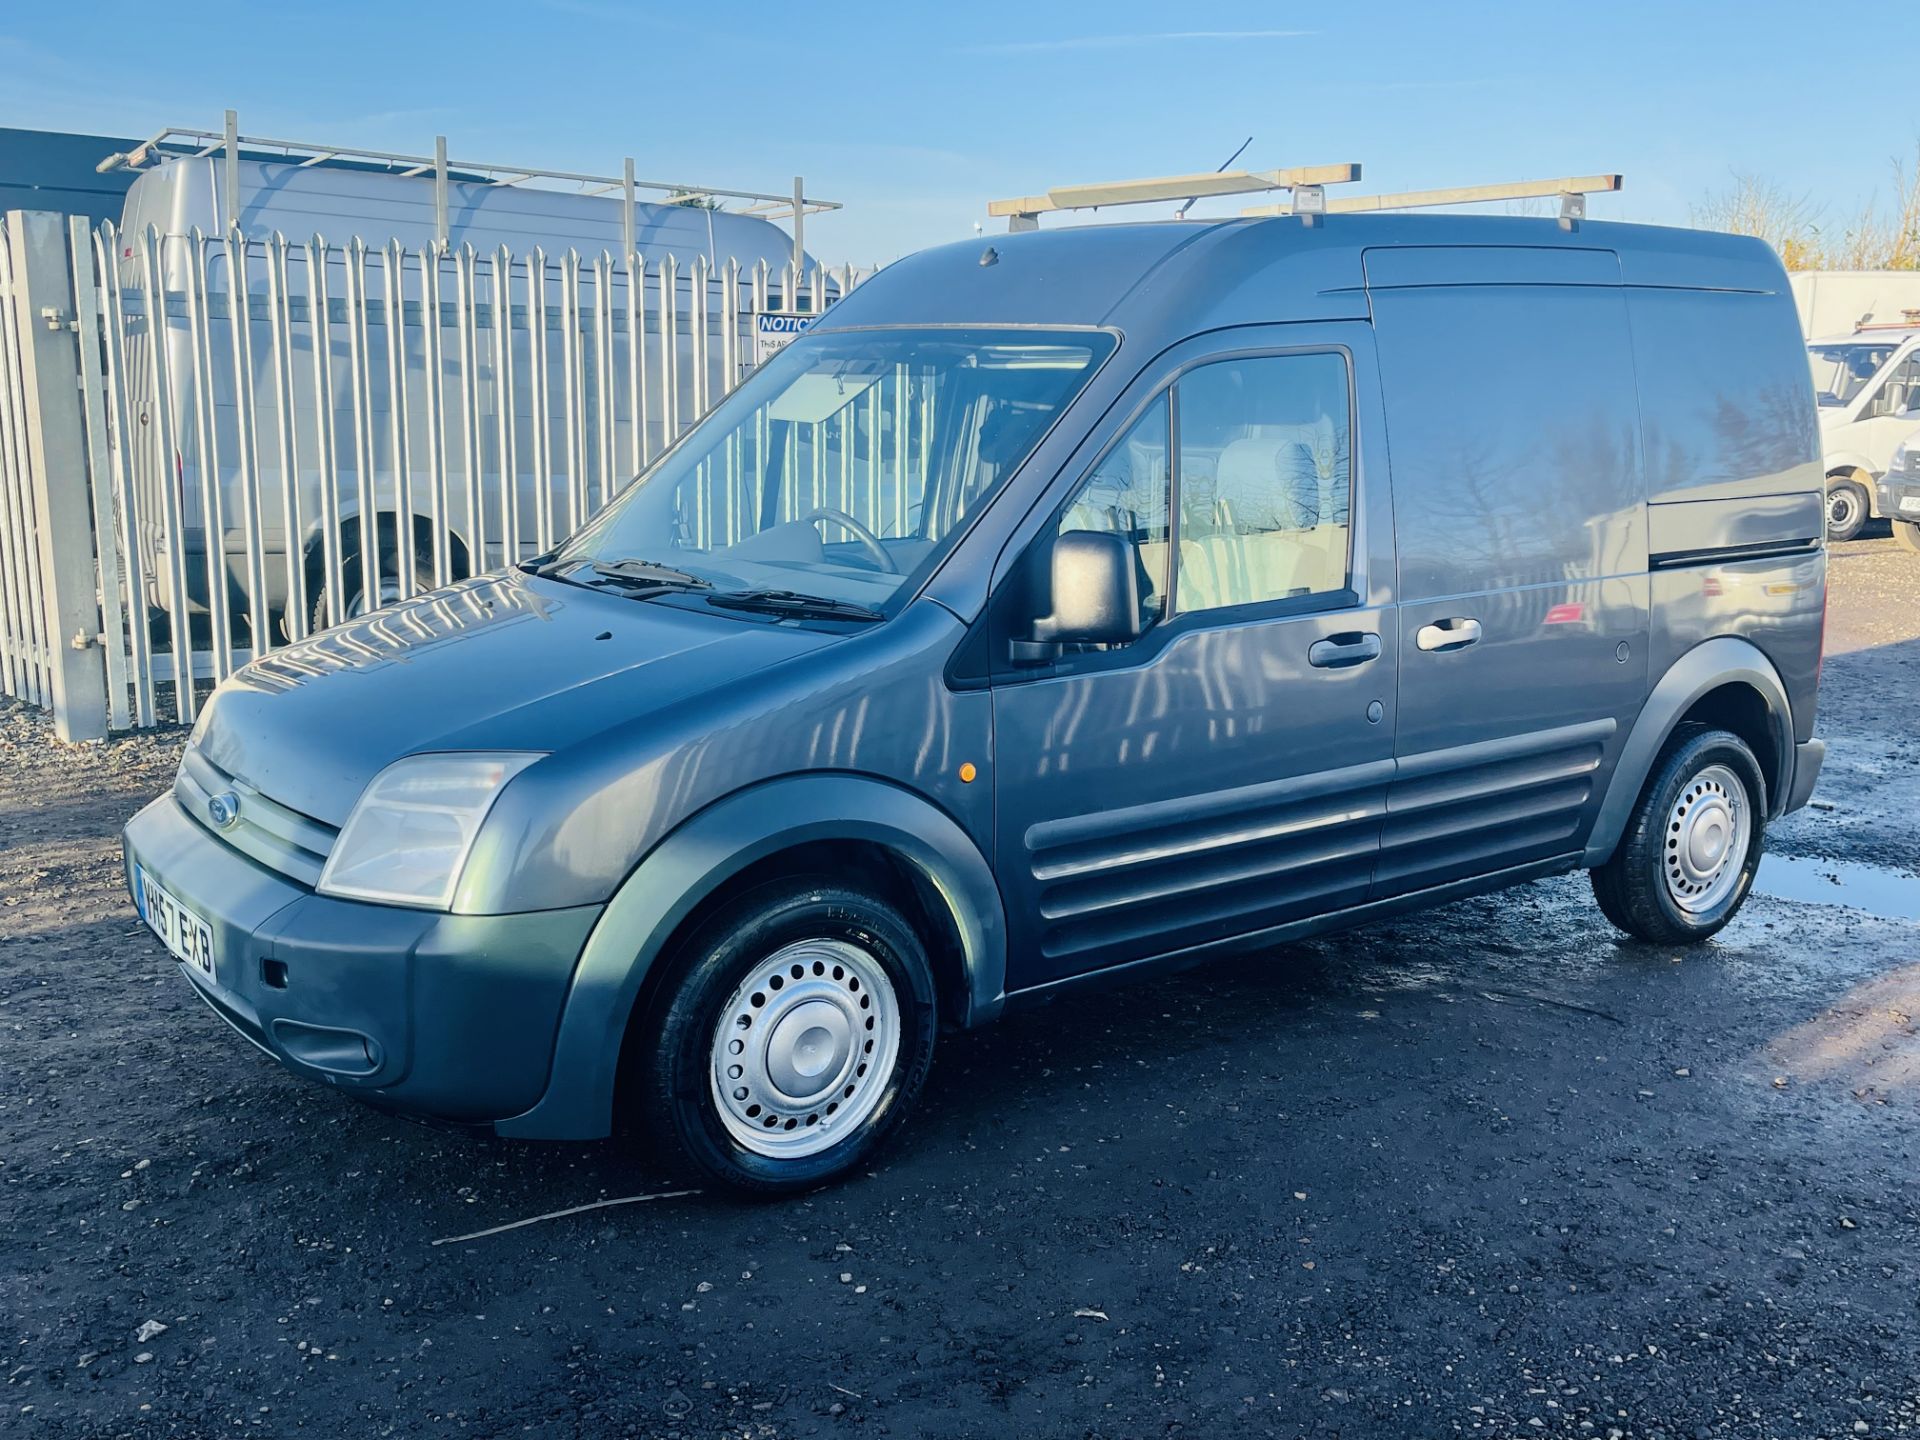 Ford Transit Connect 1.8 TDCI T230 LX110 LWB High Roof 2007 '57 Reg' A/C - No vat save 20% - Image 6 of 20